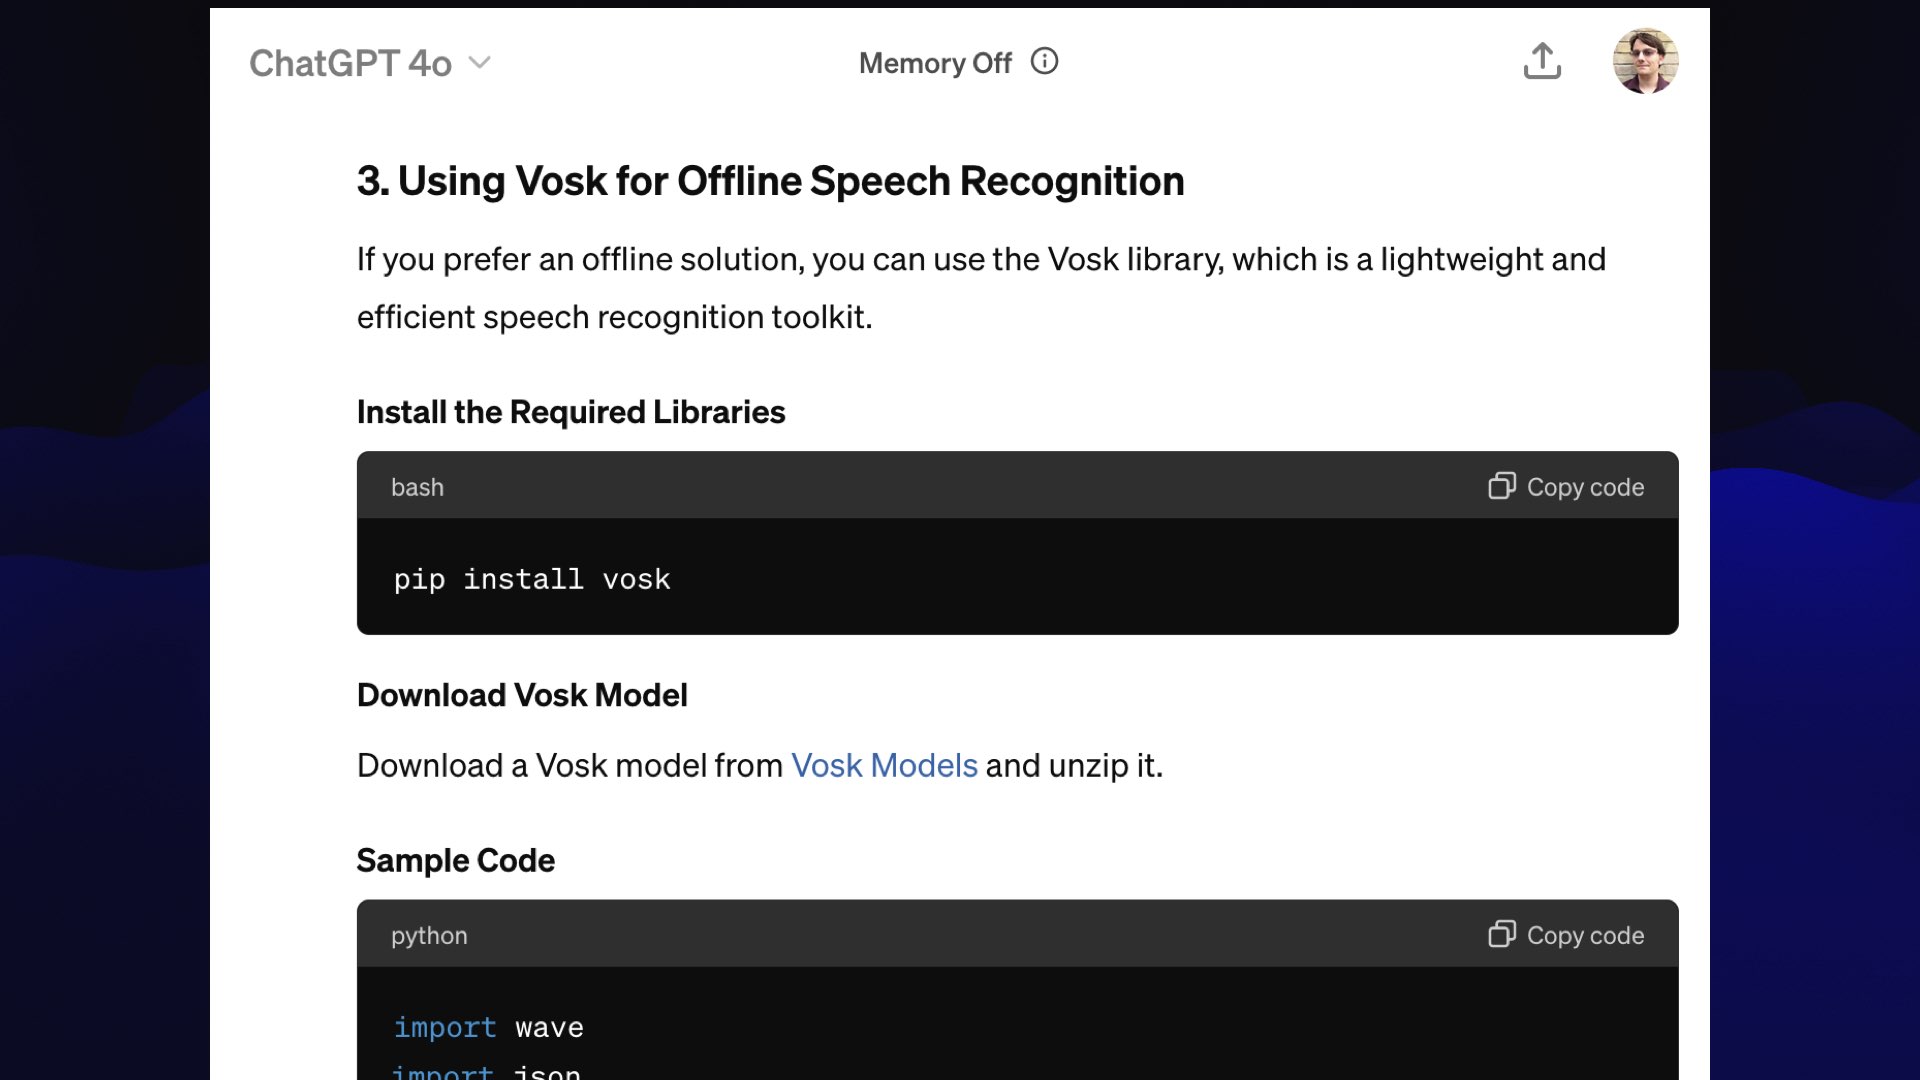 ChatGPT:  3. Using Vosk for Offline Speech Recognition  If you prefer an offline solution, you can use the Vosk library, which is a lightweight and efficient speech recognition toolkit.  Install the Required Libraries  pip install vosk  Download Vosk Model  Download a Vosk model from Vosk Models and unzip it.  Sample Code  import wave ...